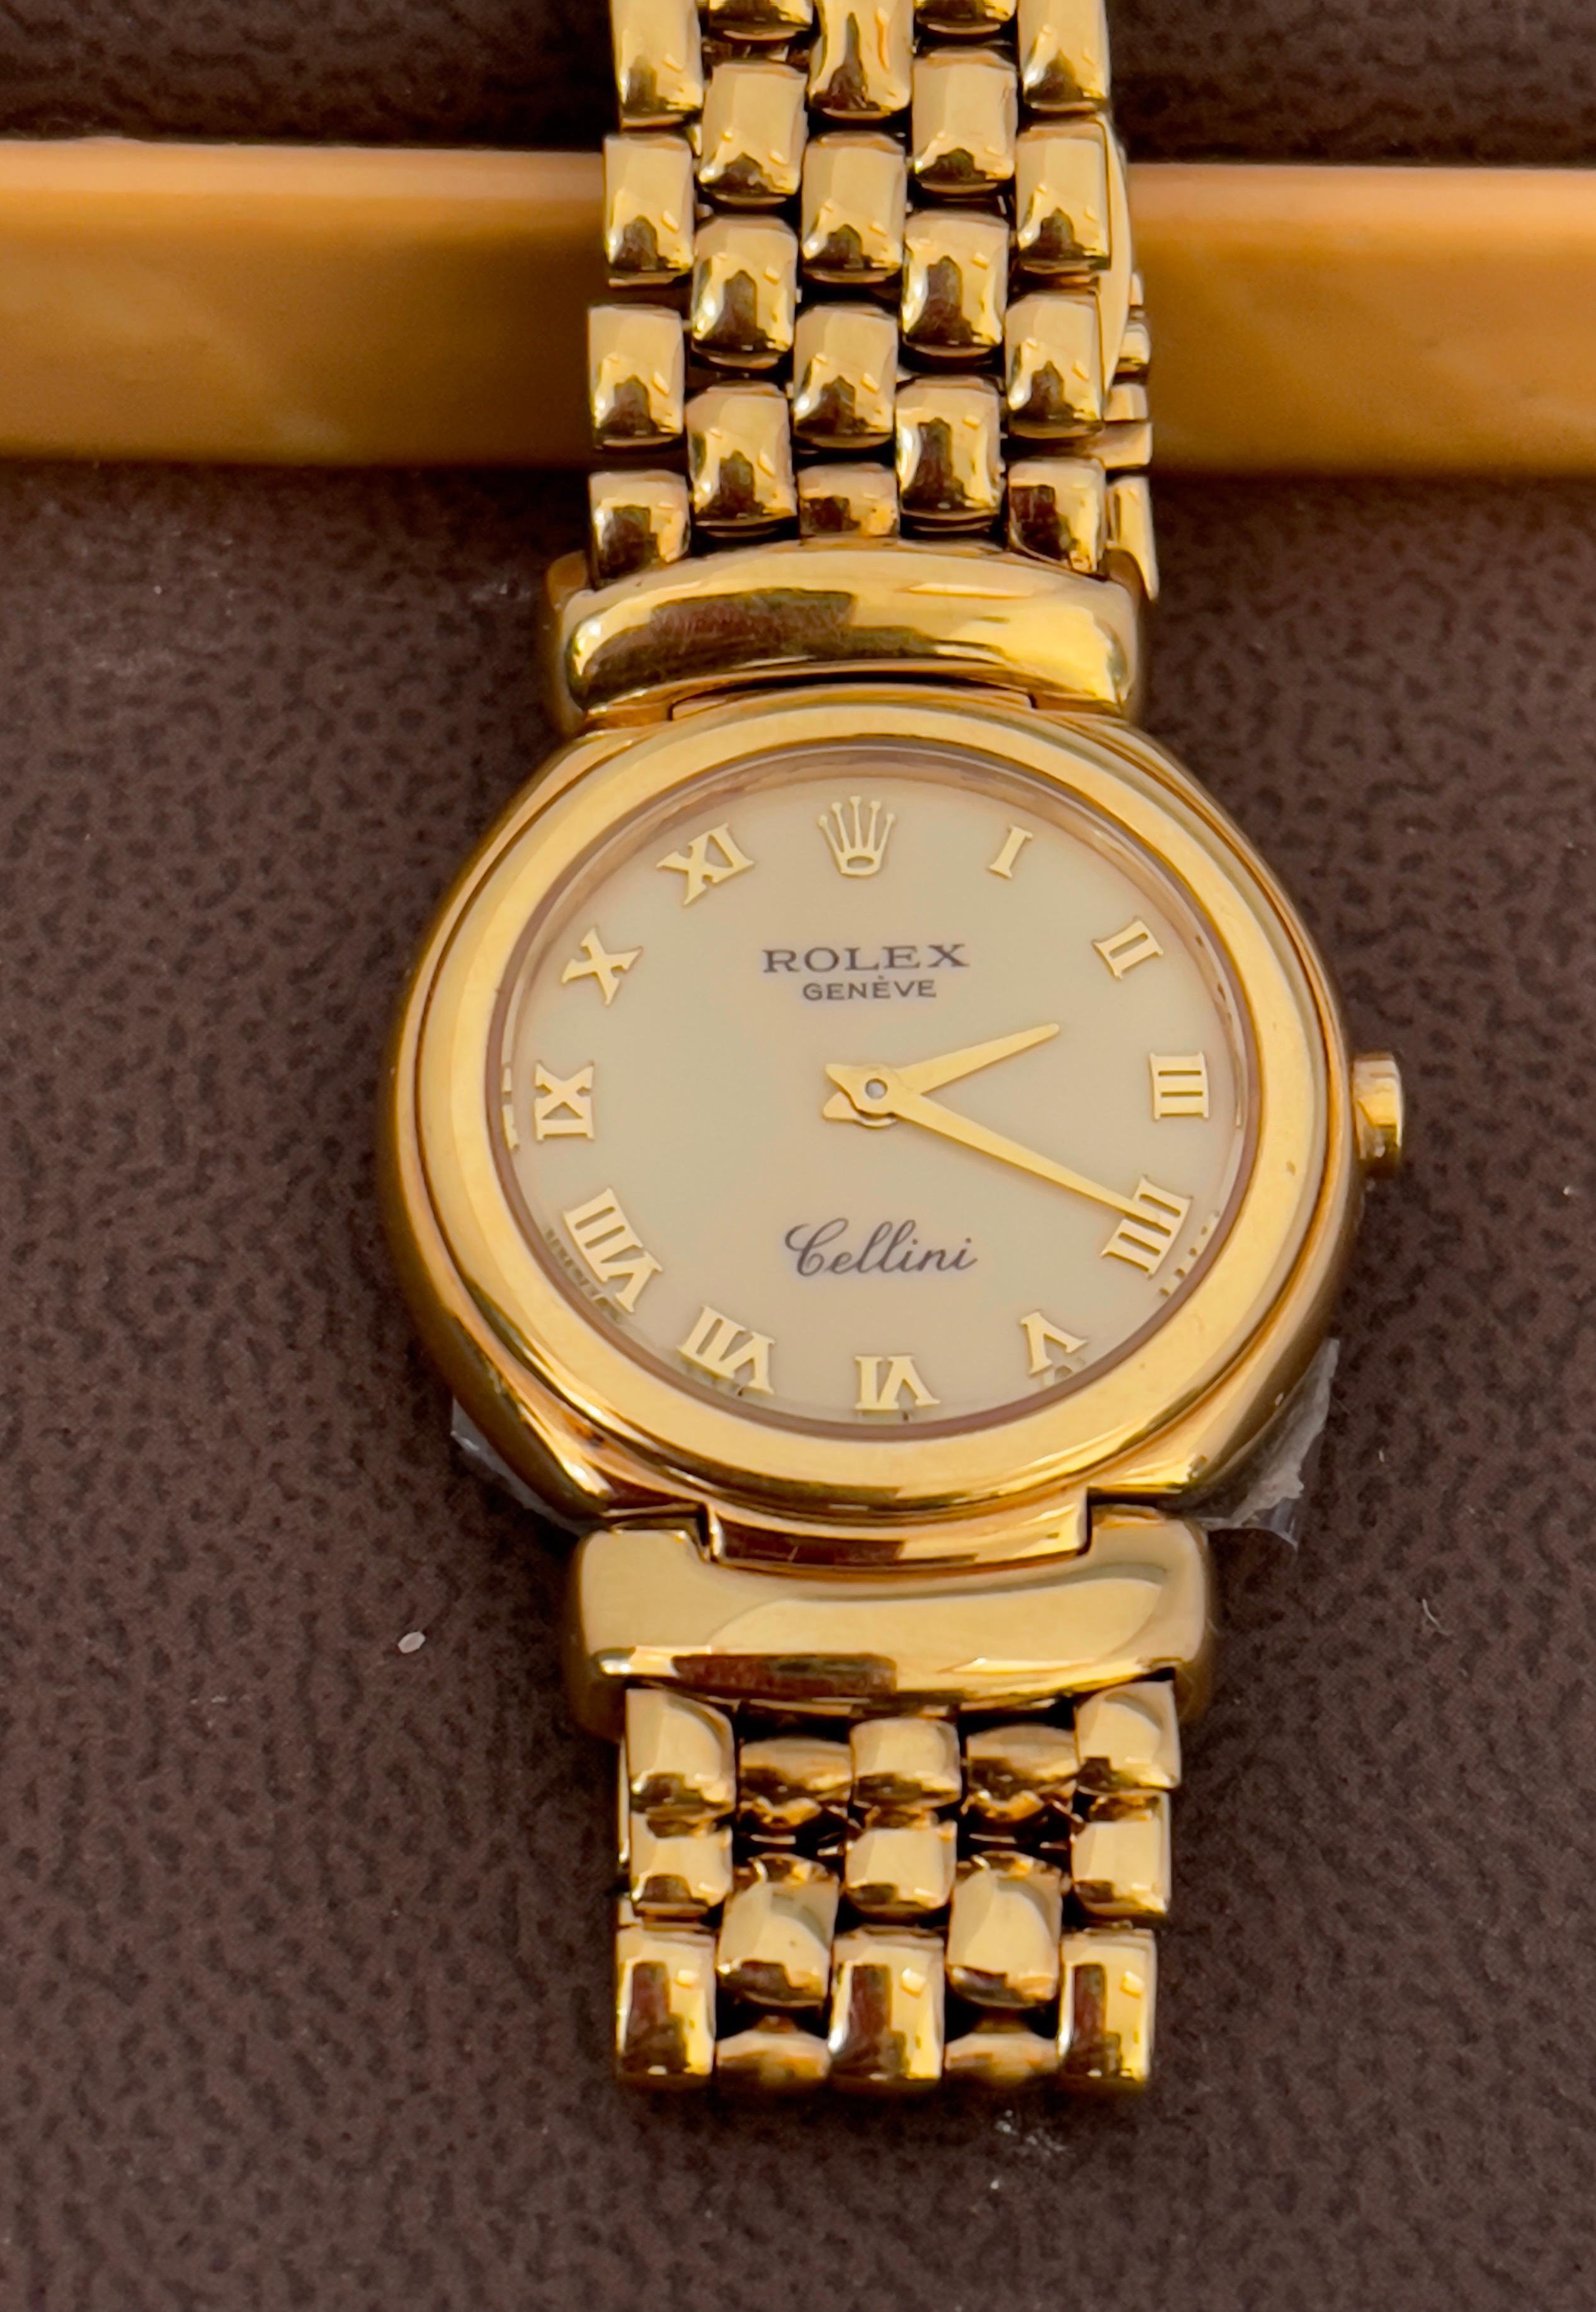 Rolex 'Cellini' 18 Karat Gold Mother of Pearl Watch 66.5 Grams 7